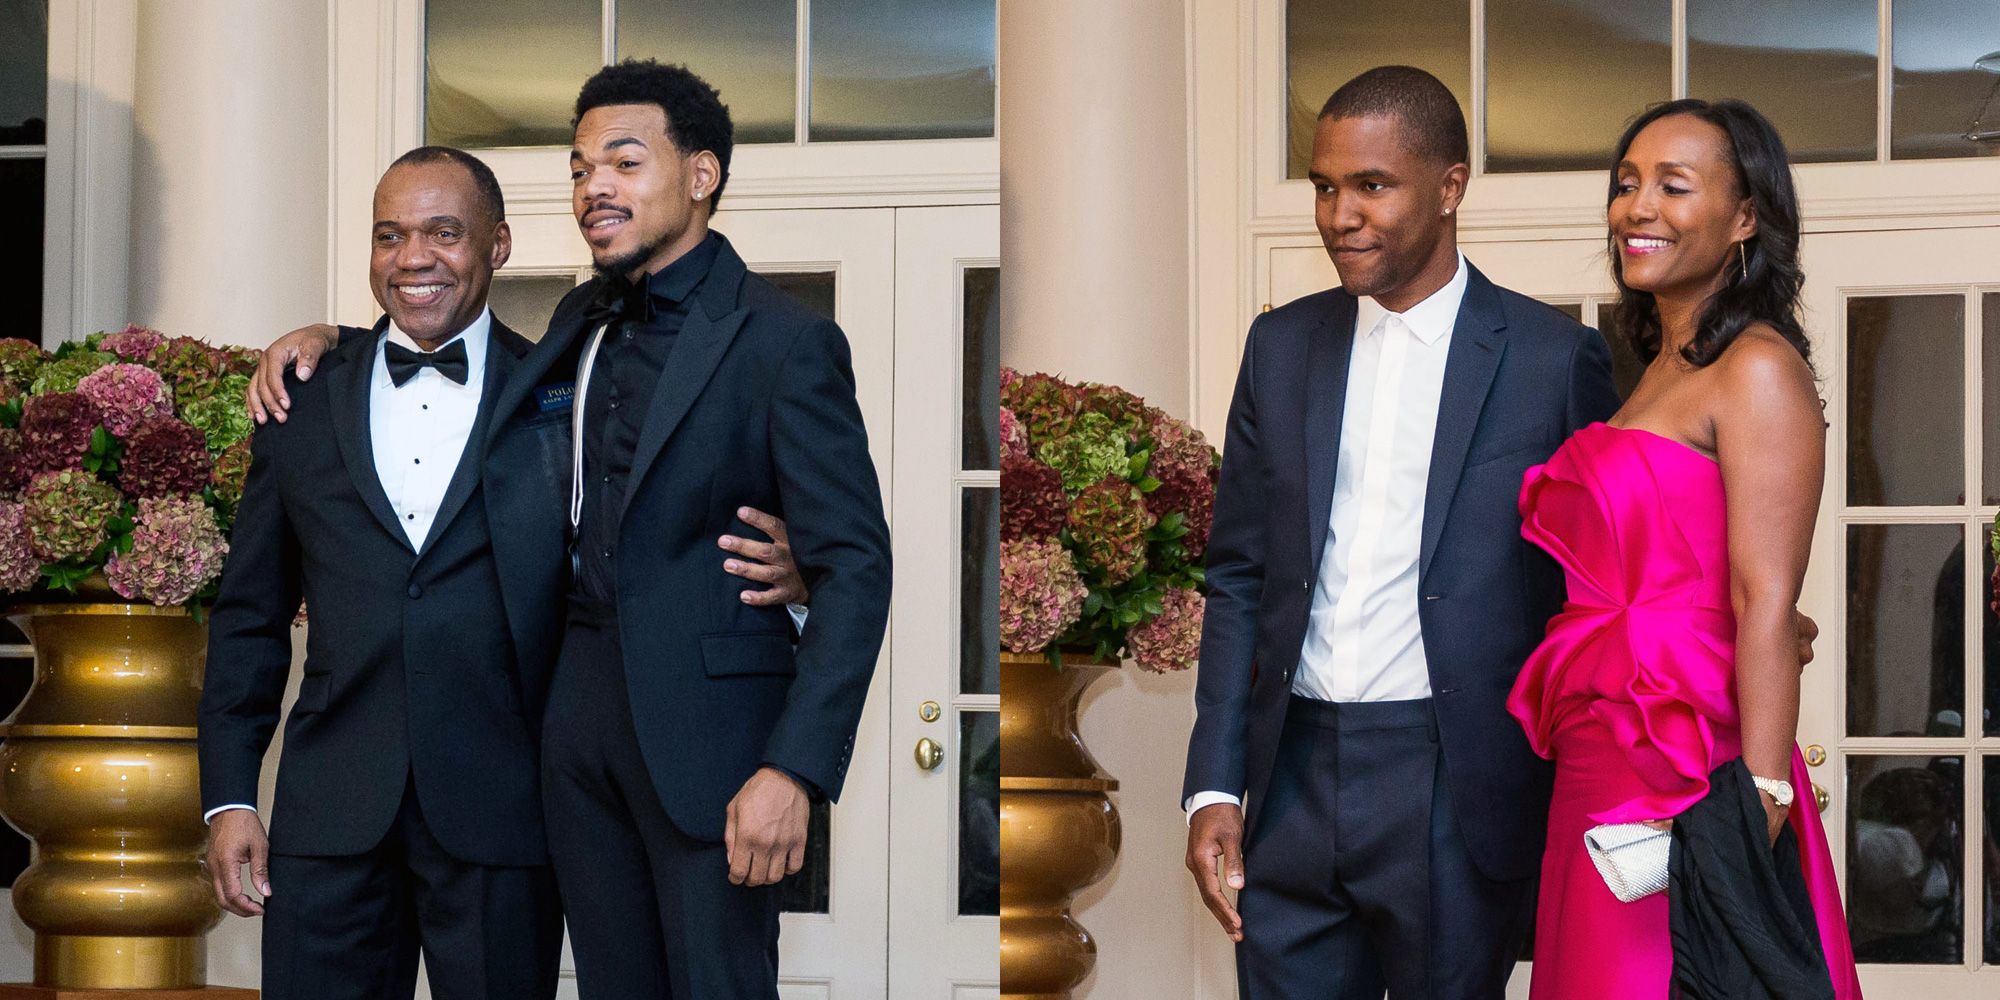 Chance the Rapper and Ocean Brought Some Serious Style to the White House